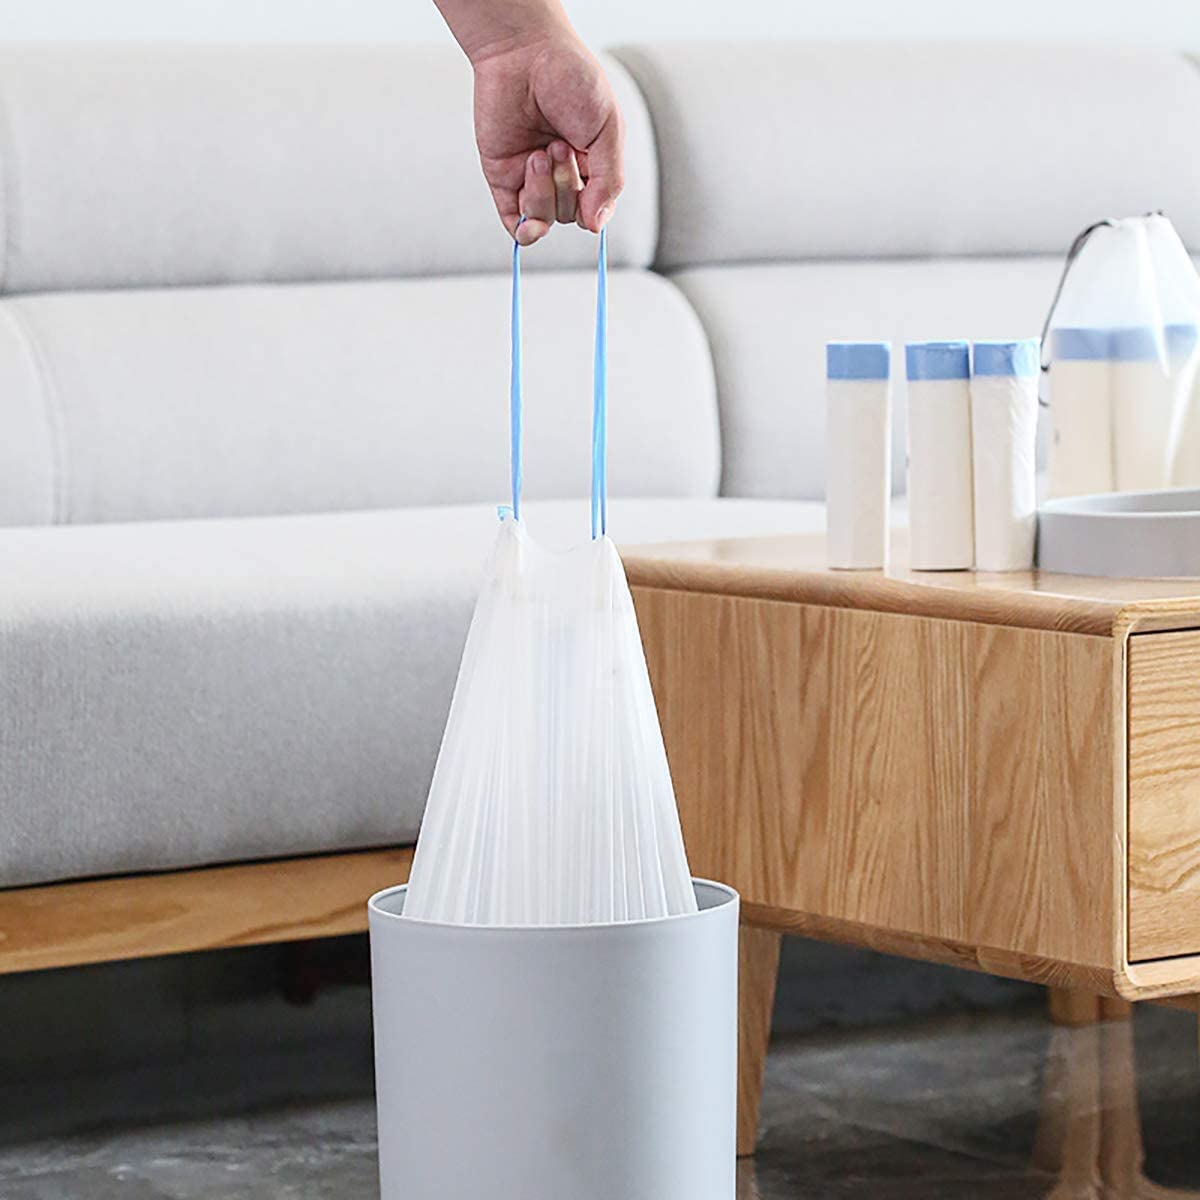 Kitchen Office Small Trash Bags 4 Gallon Car Home 90 Counts Drawstring Trash Bags Garbage Bags Wastebasket Bin Liners Plastic 15 Liter for Bathroom Bedroom 